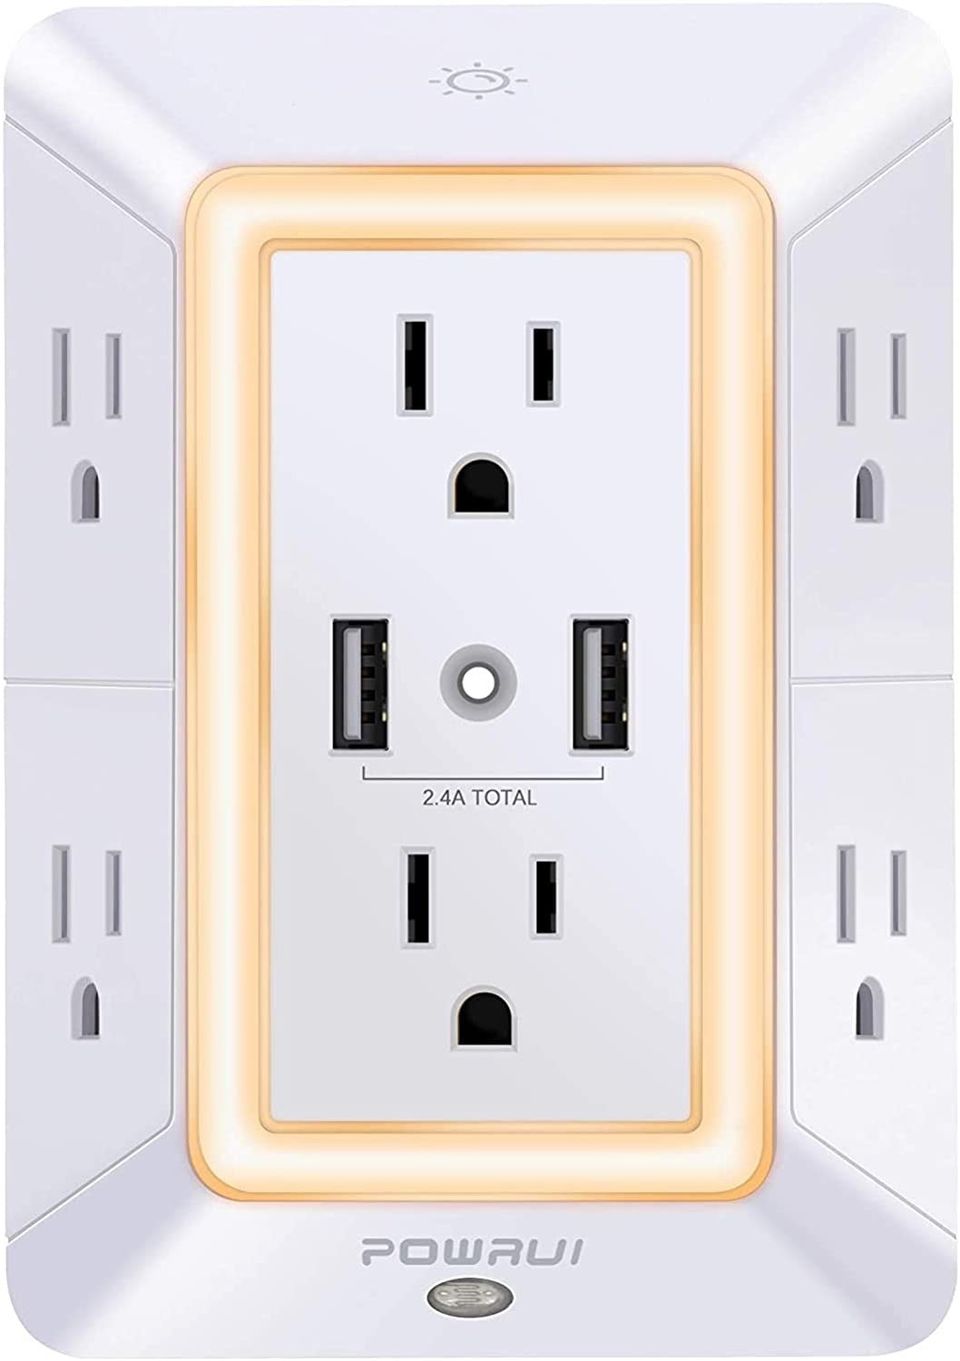 A six-outlet wall charger designed specifically for larger chargers